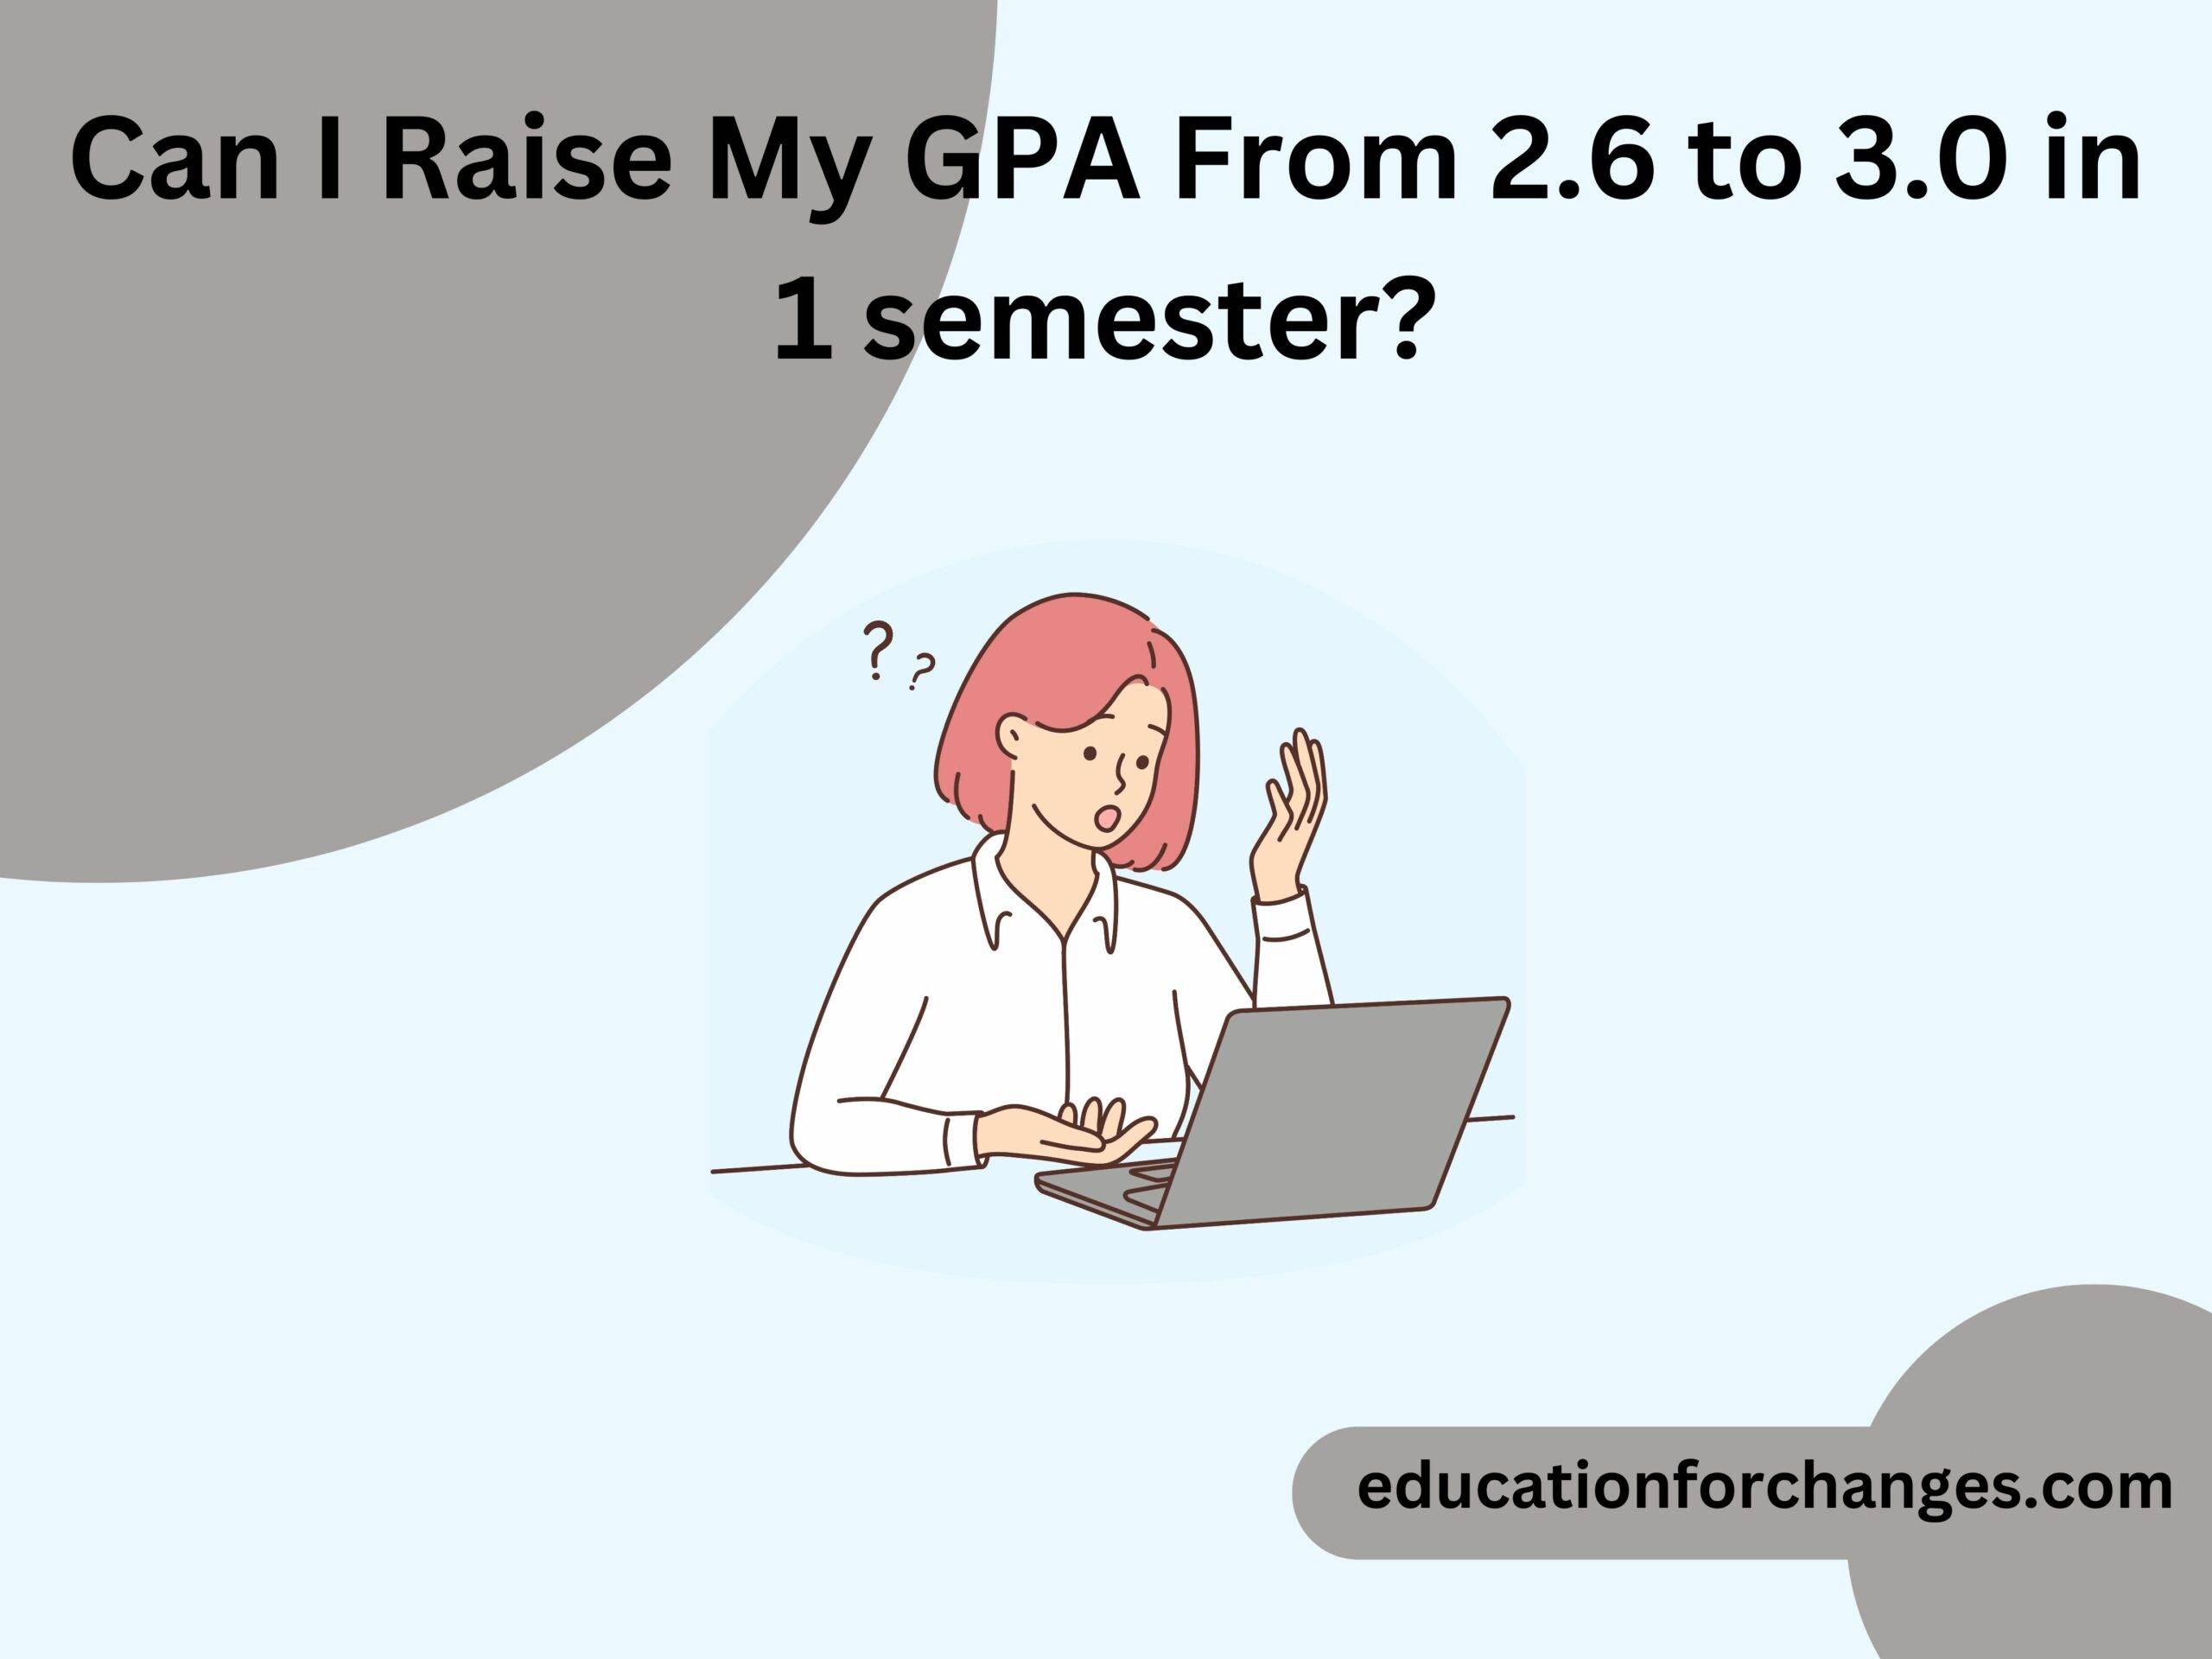 Can I Raise My GPA From 2.6 to 3.0 in 1 semester?